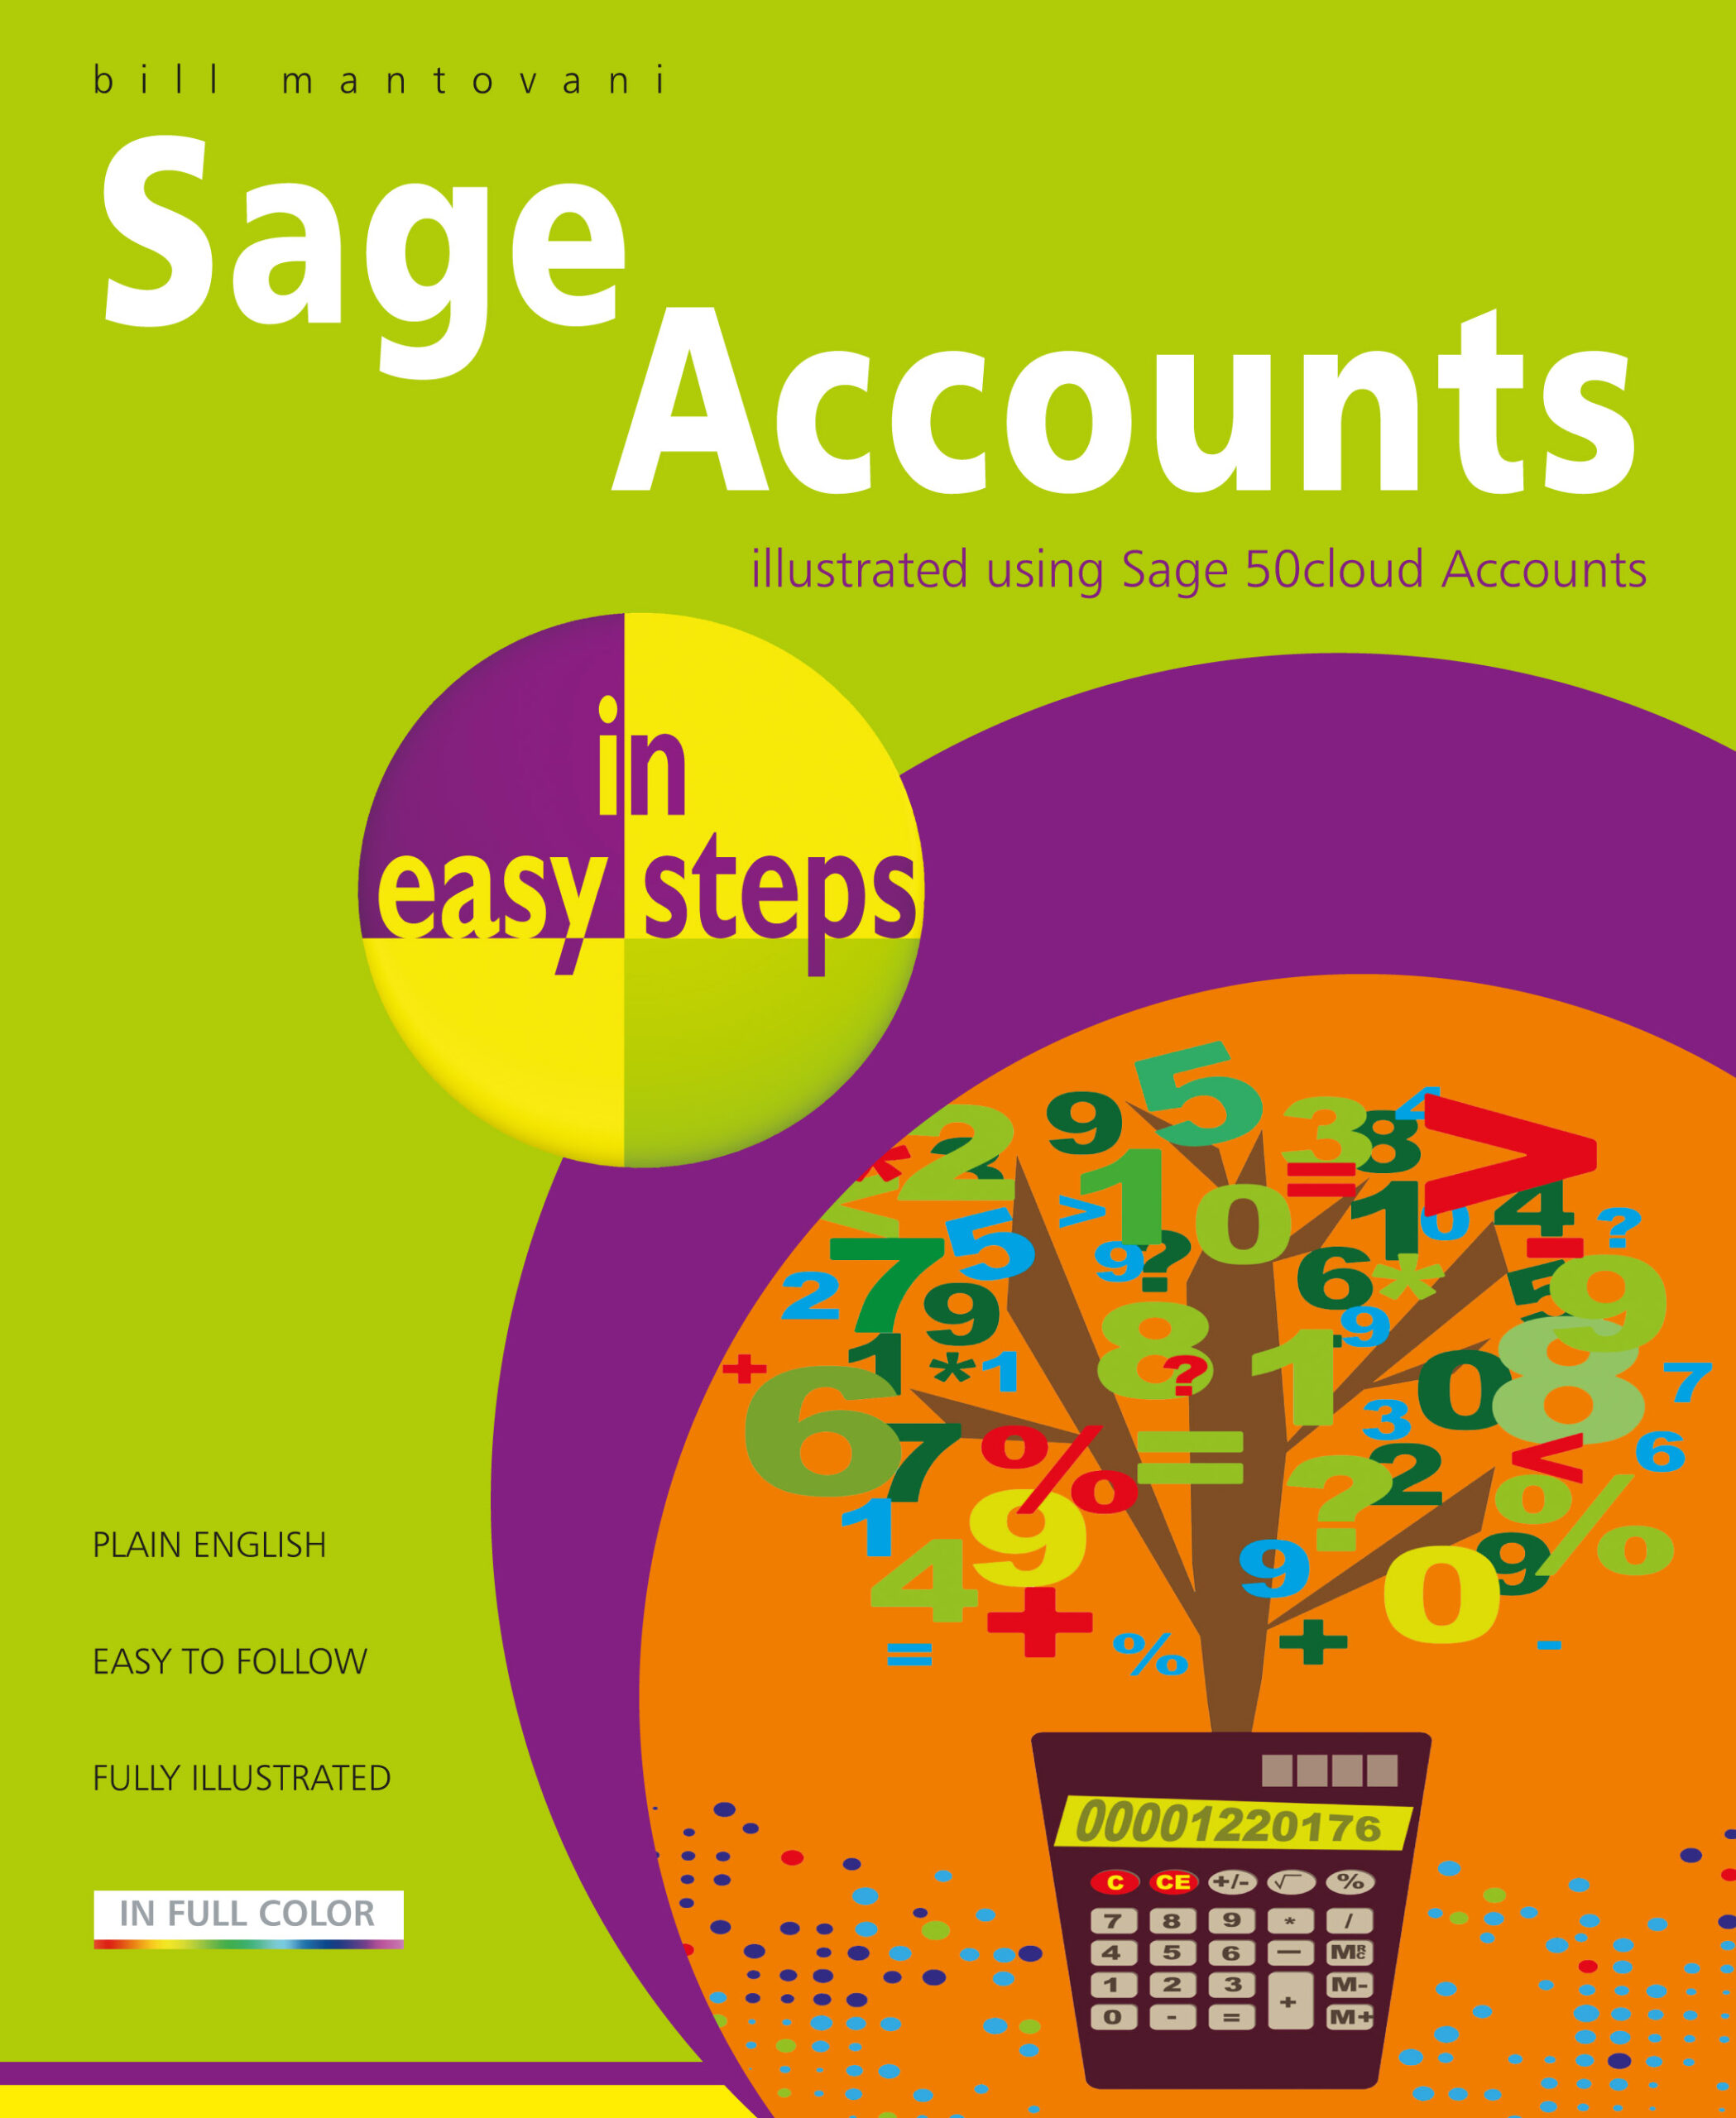 Sage Accounts in easy steps illustrated using Sage 50 cloud Accounts